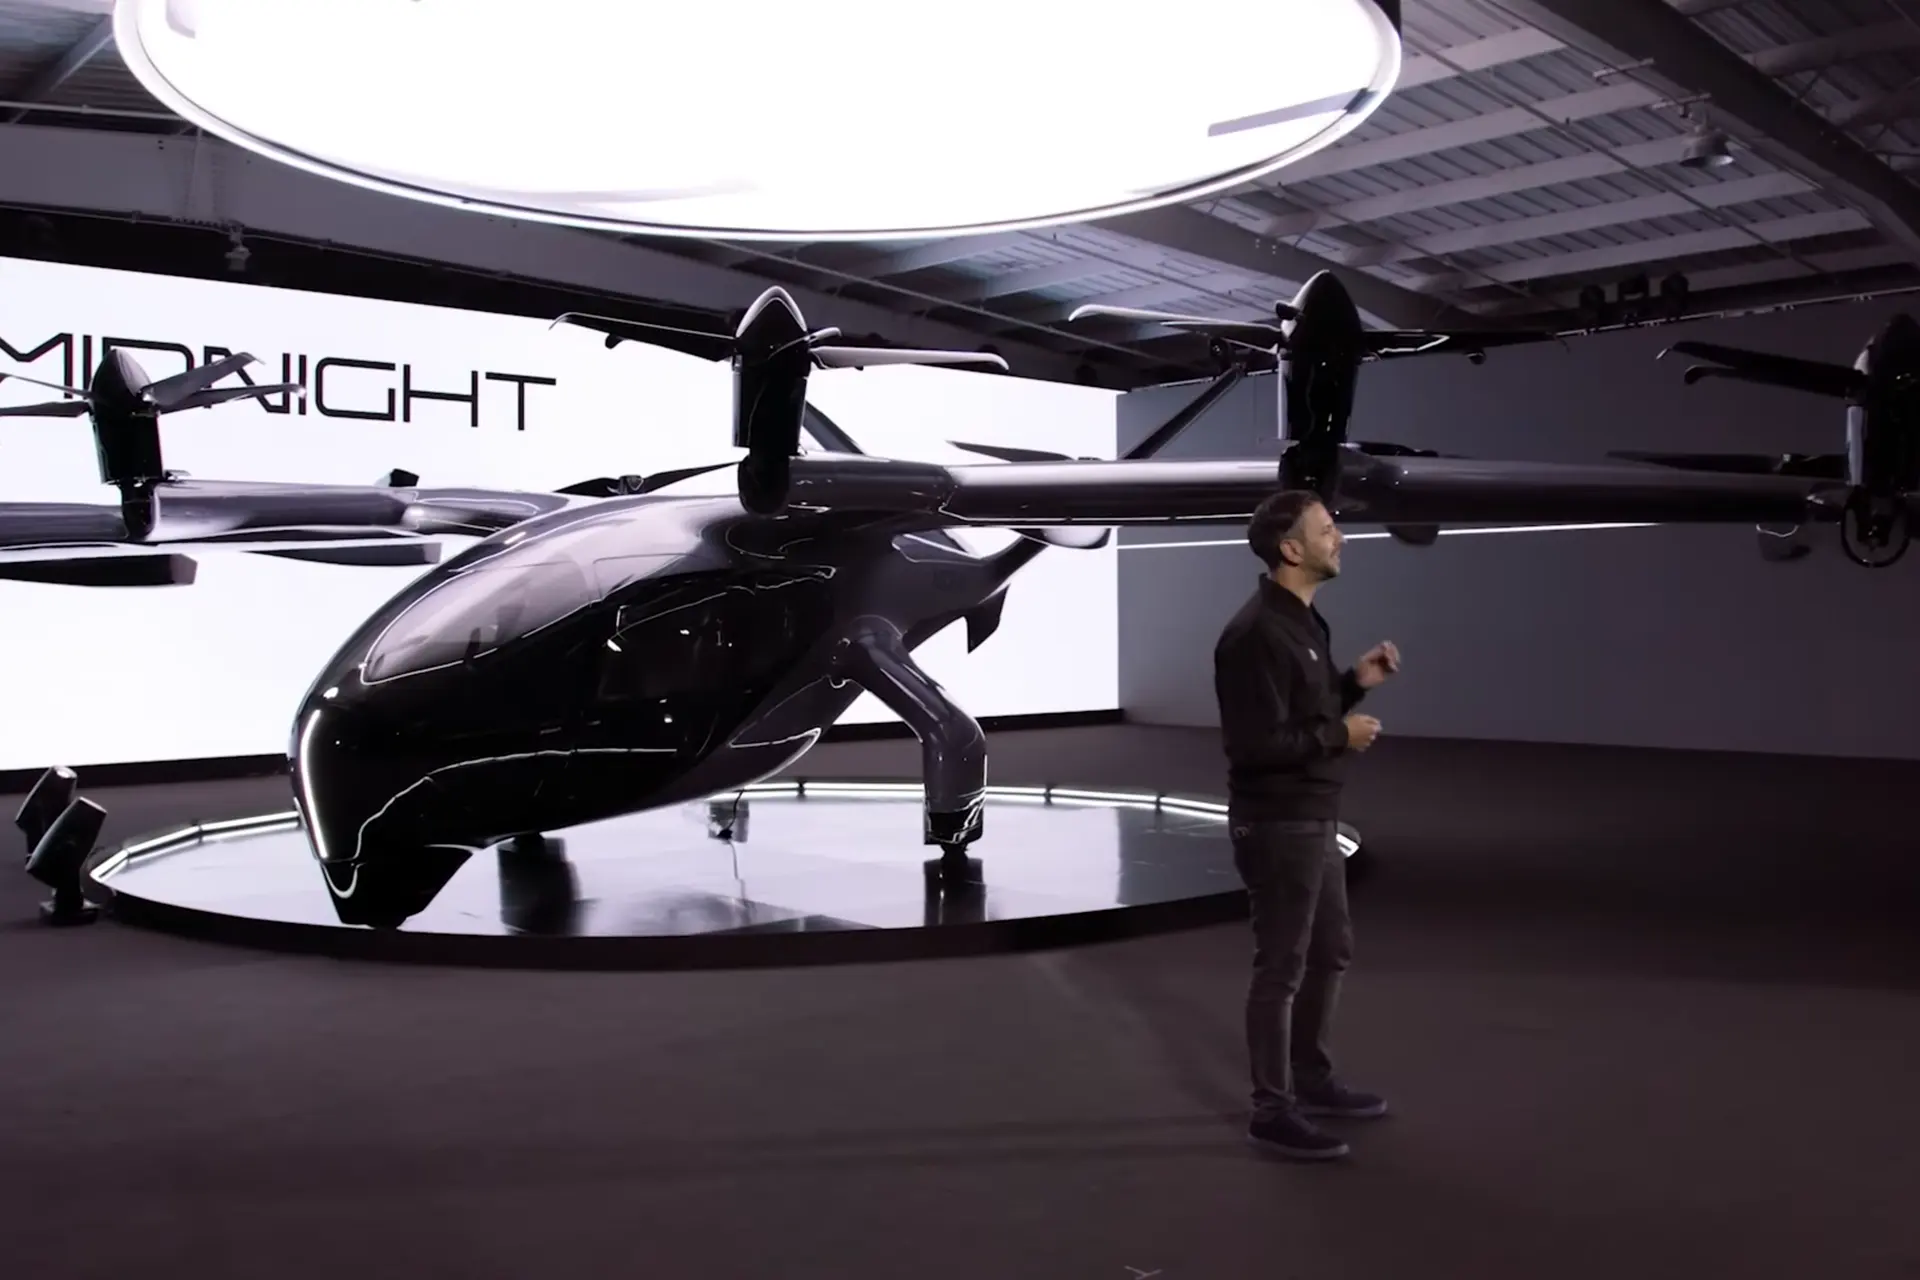 Meet Midnight, the eVTOL Air Taxi That Archer Will Take to Production